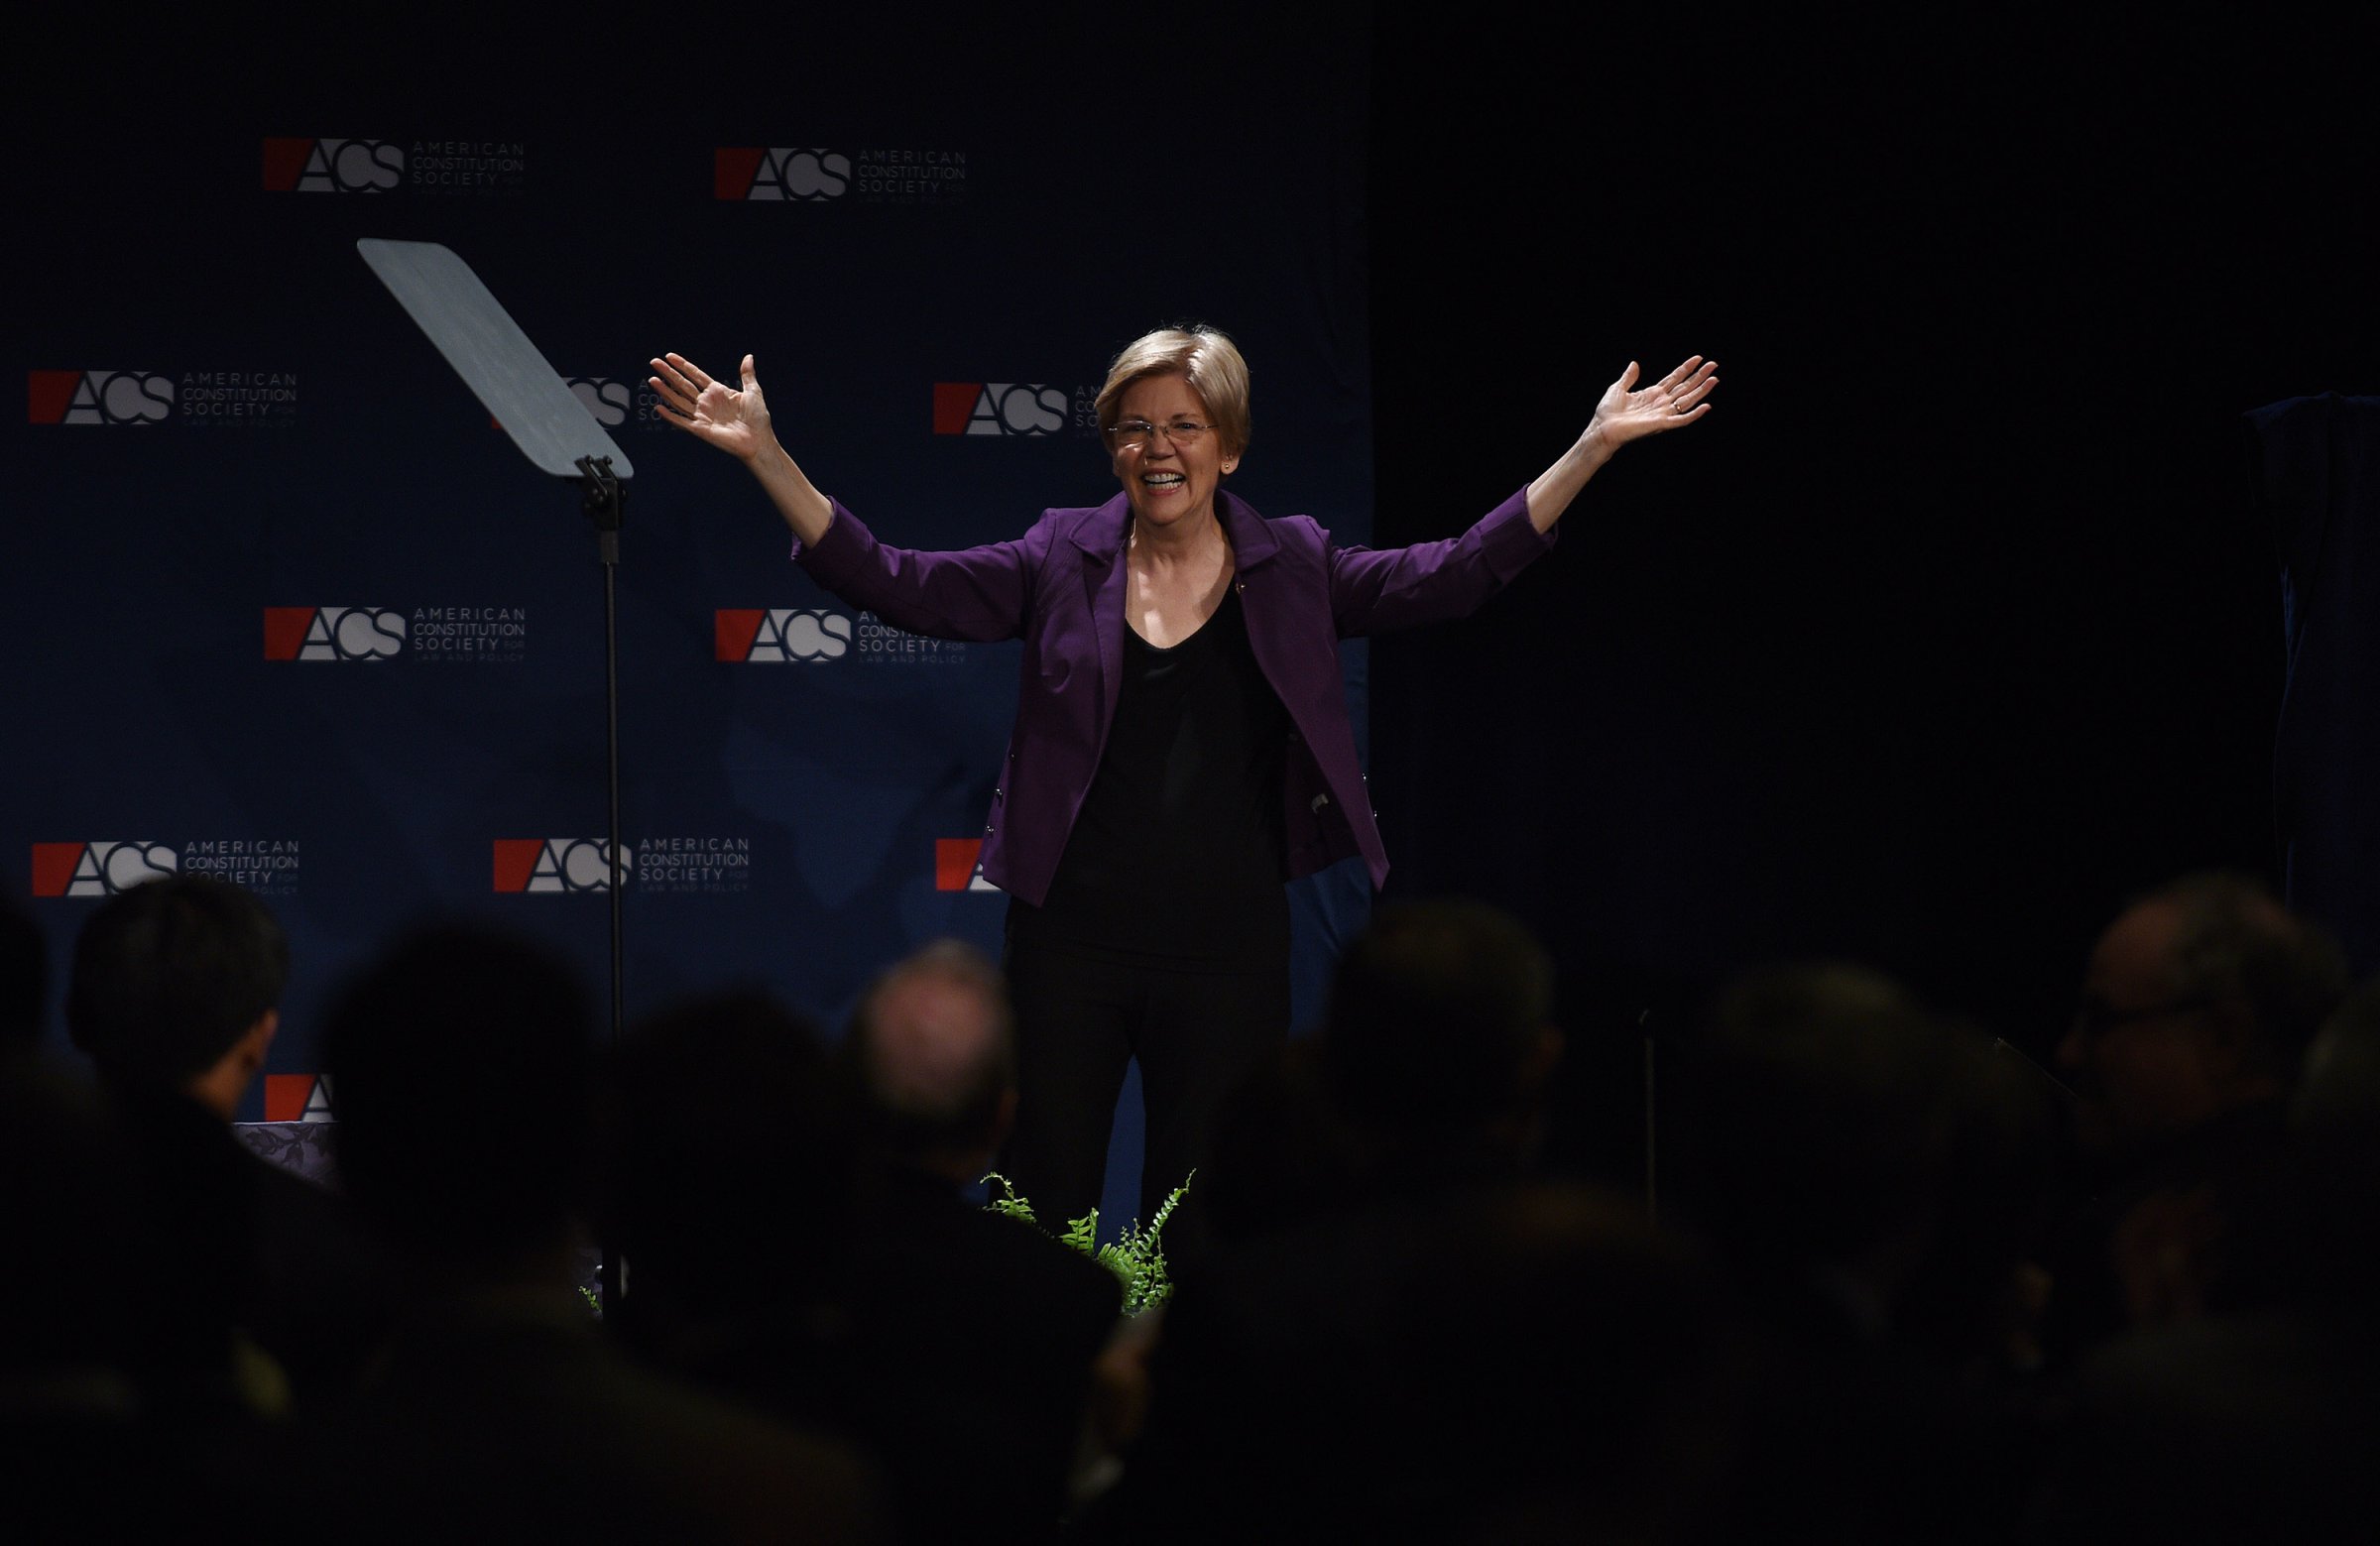 Sen. Elizabeth Warren (D-Mass.) raises her arms after addressing the American Constitution Society 2016 National Convention on June 9, 2016 in Washington, DC. The senator attended the gala dinner of the convention at the Capital Hilton.